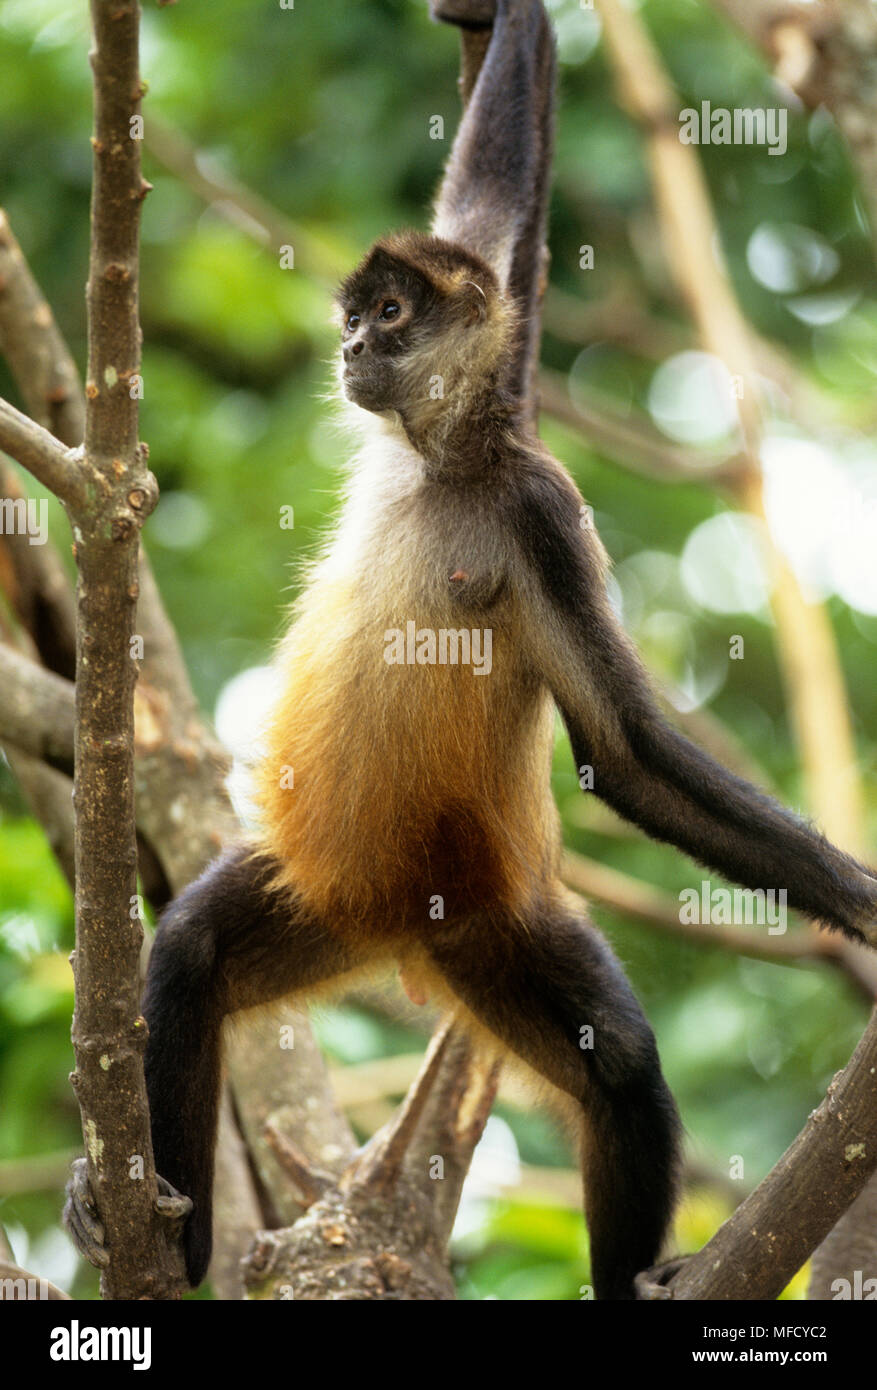 CENTRAL AMERICAN SPIDER MONKEY Ateles geoffroyi panamensis Costa Rica. Endangered. Stock Photo